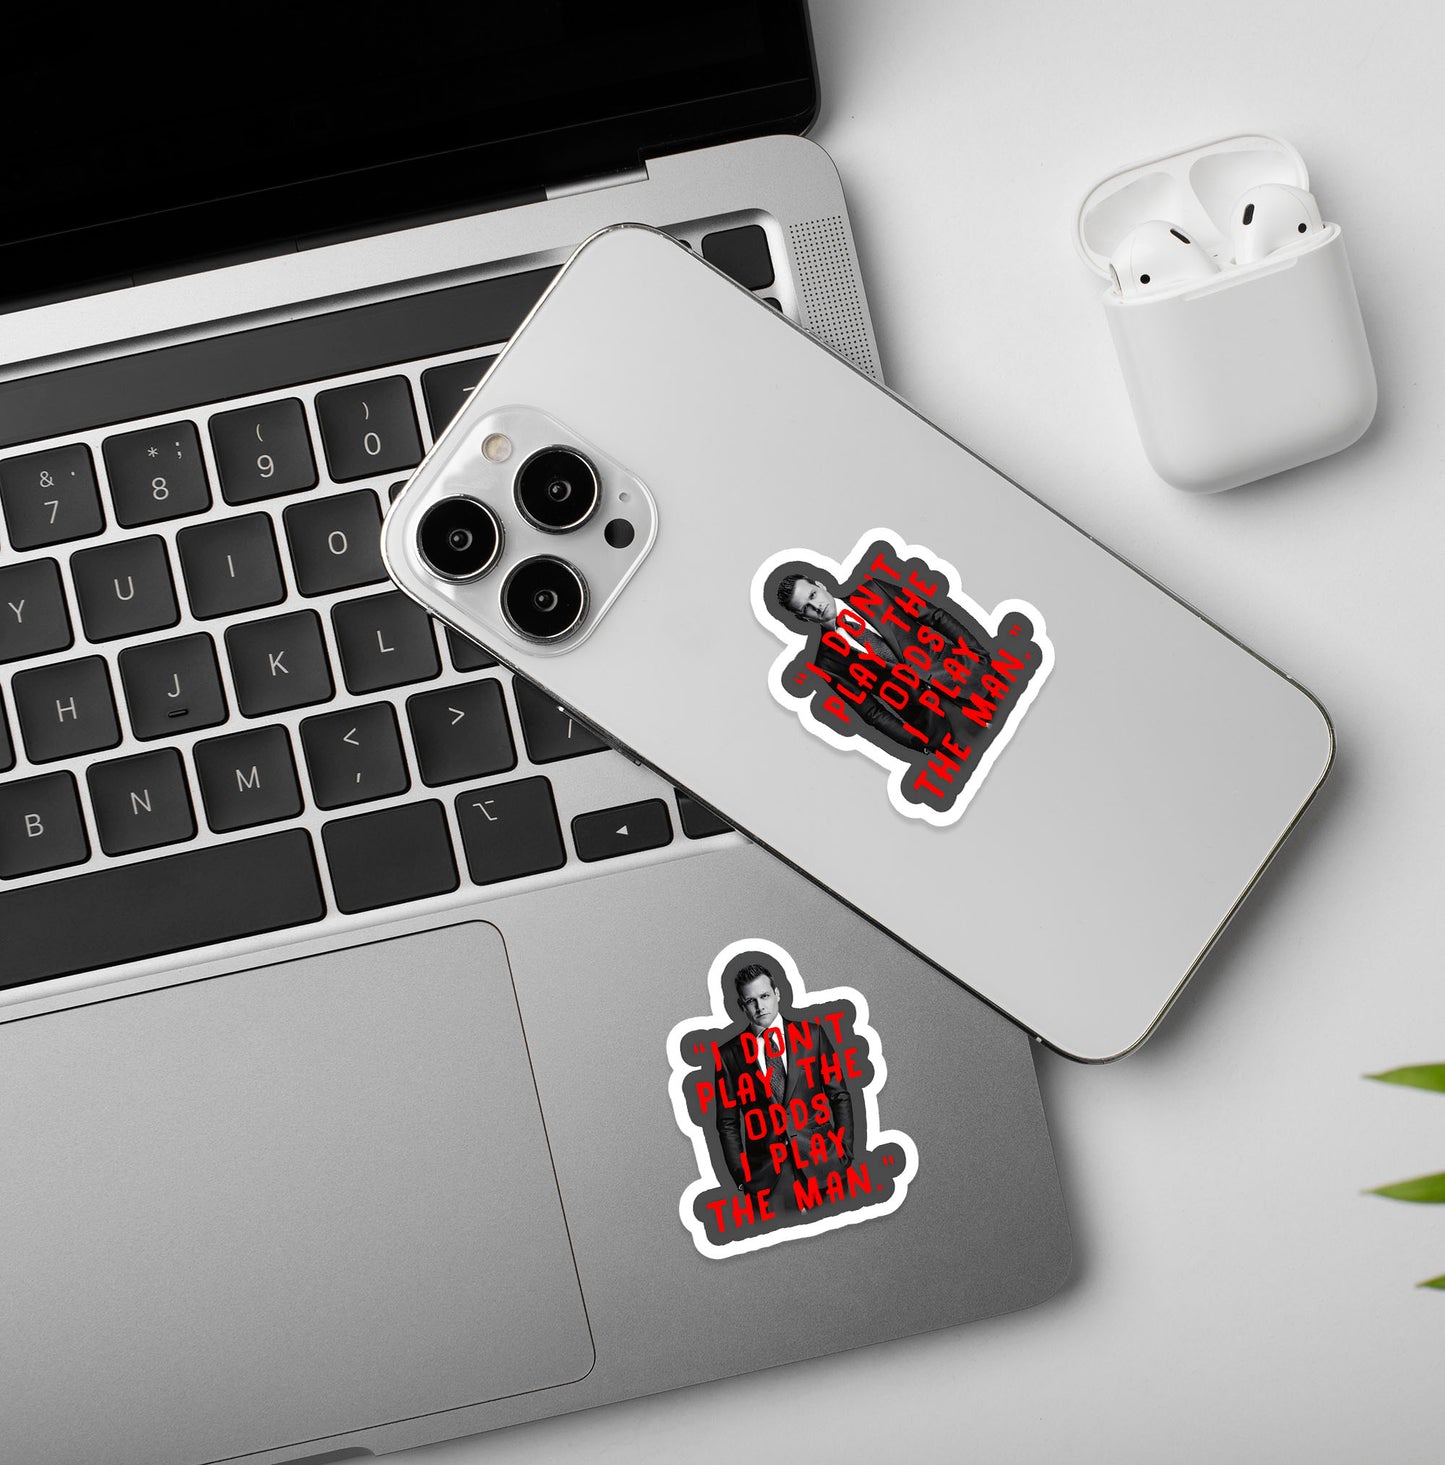 I Play The Man | Suits - Laptop / Mobile Sticker